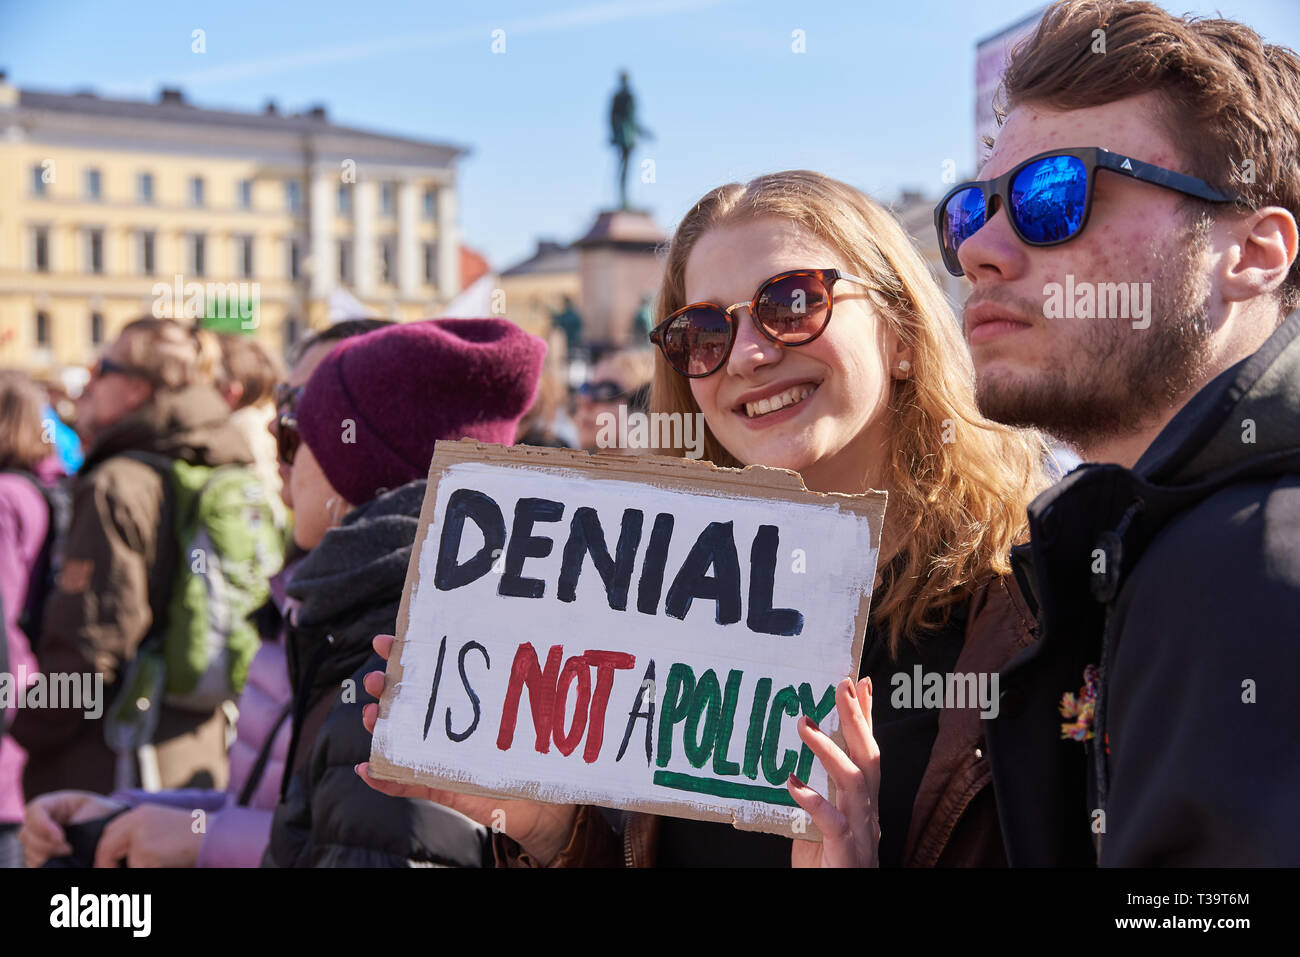 Helsinki, Finland - April 6, 2019: March and demonstration against climate change (Ilmastomarssi) in downtown Helsinki, Finland attended by more than  Stock Photo